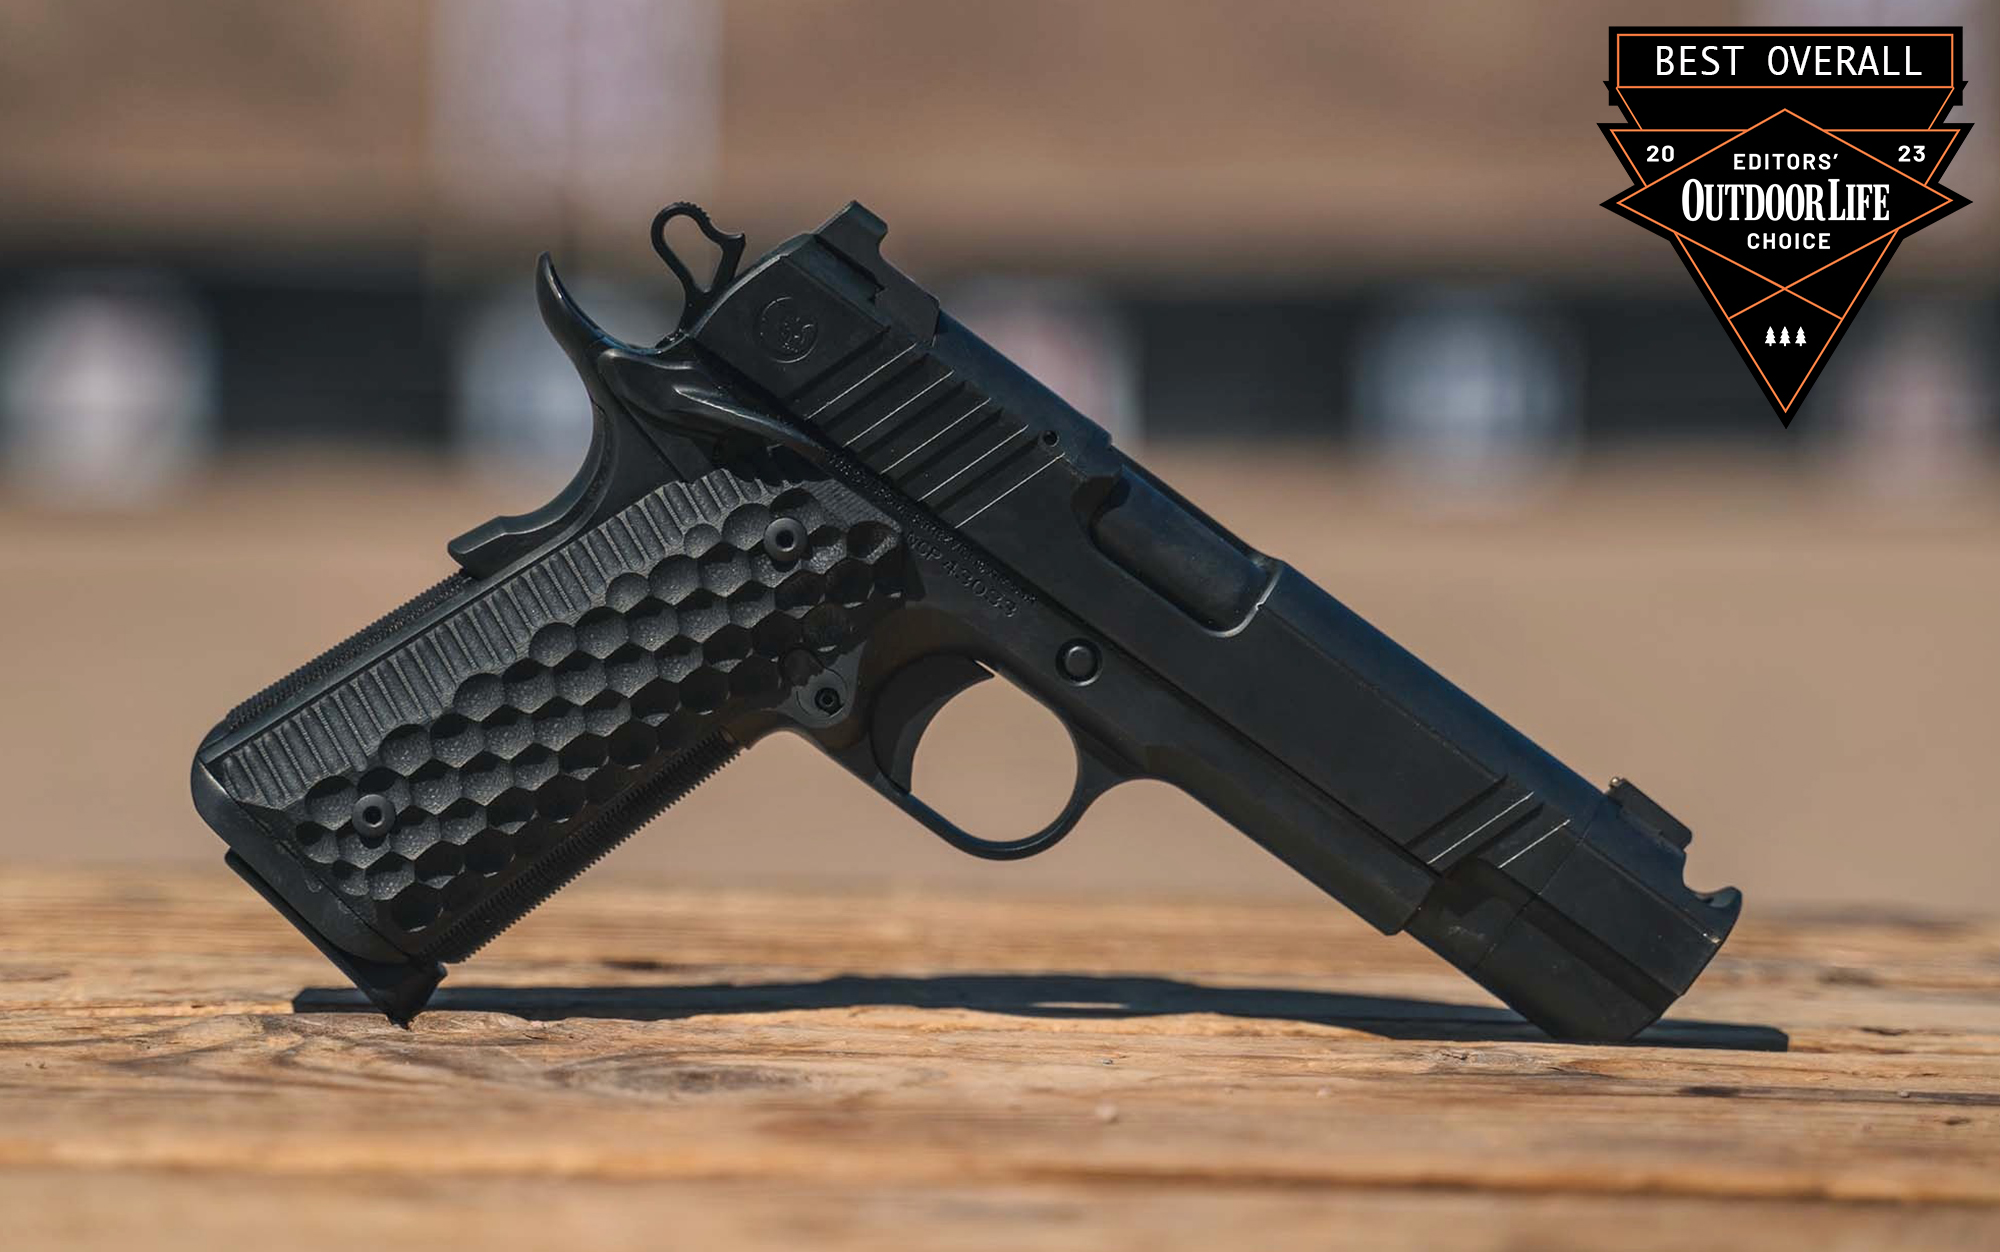 The Nighthawk is the best overall 1911.